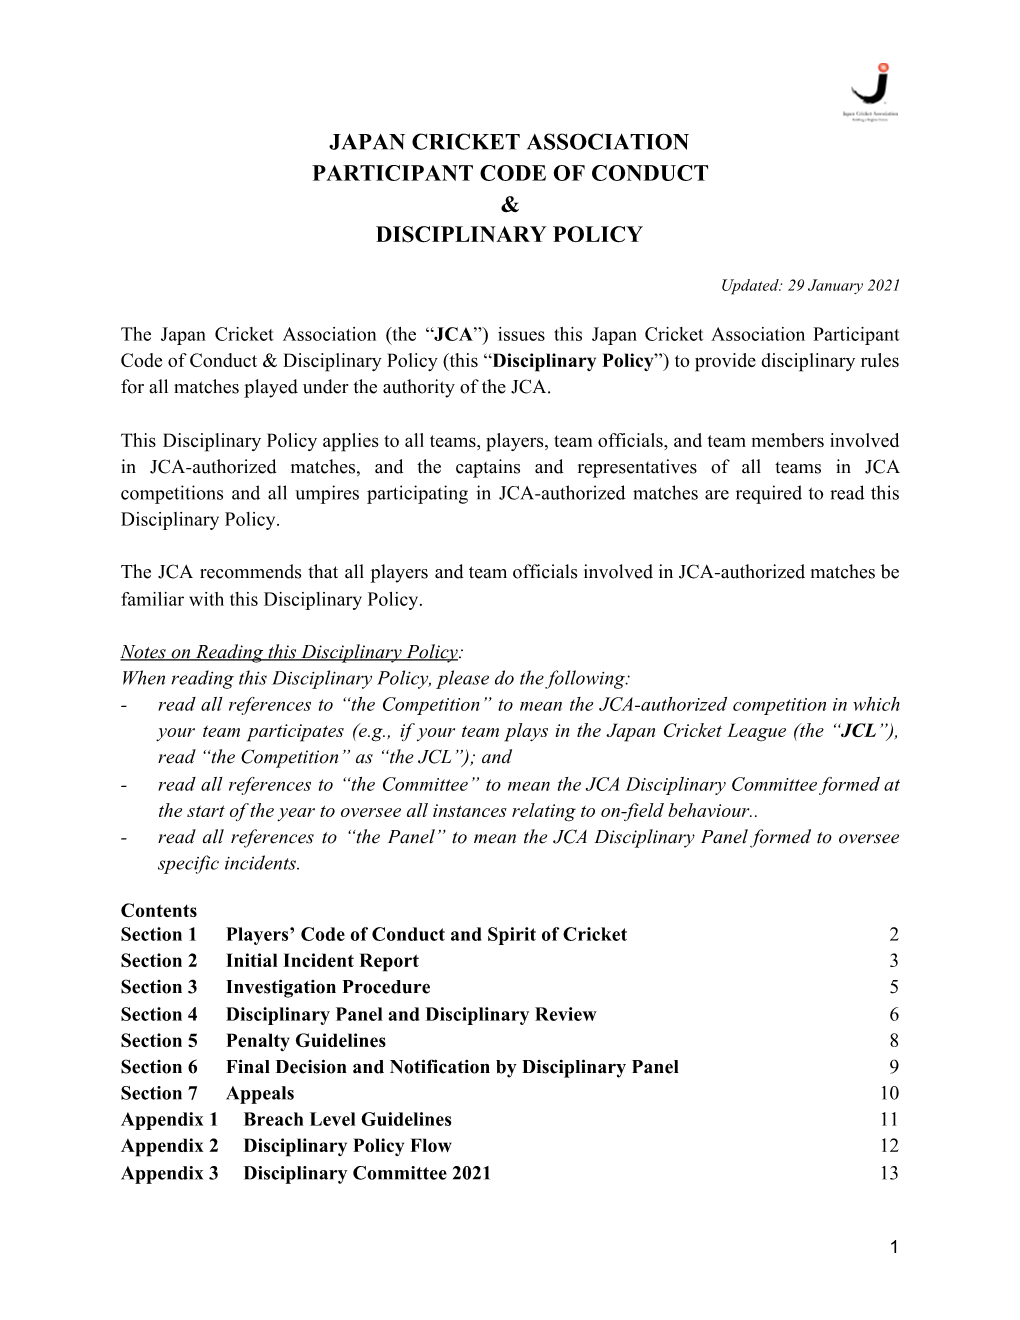 Japan Cricket Association Participant Code of Conduct & Disciplinary Policy